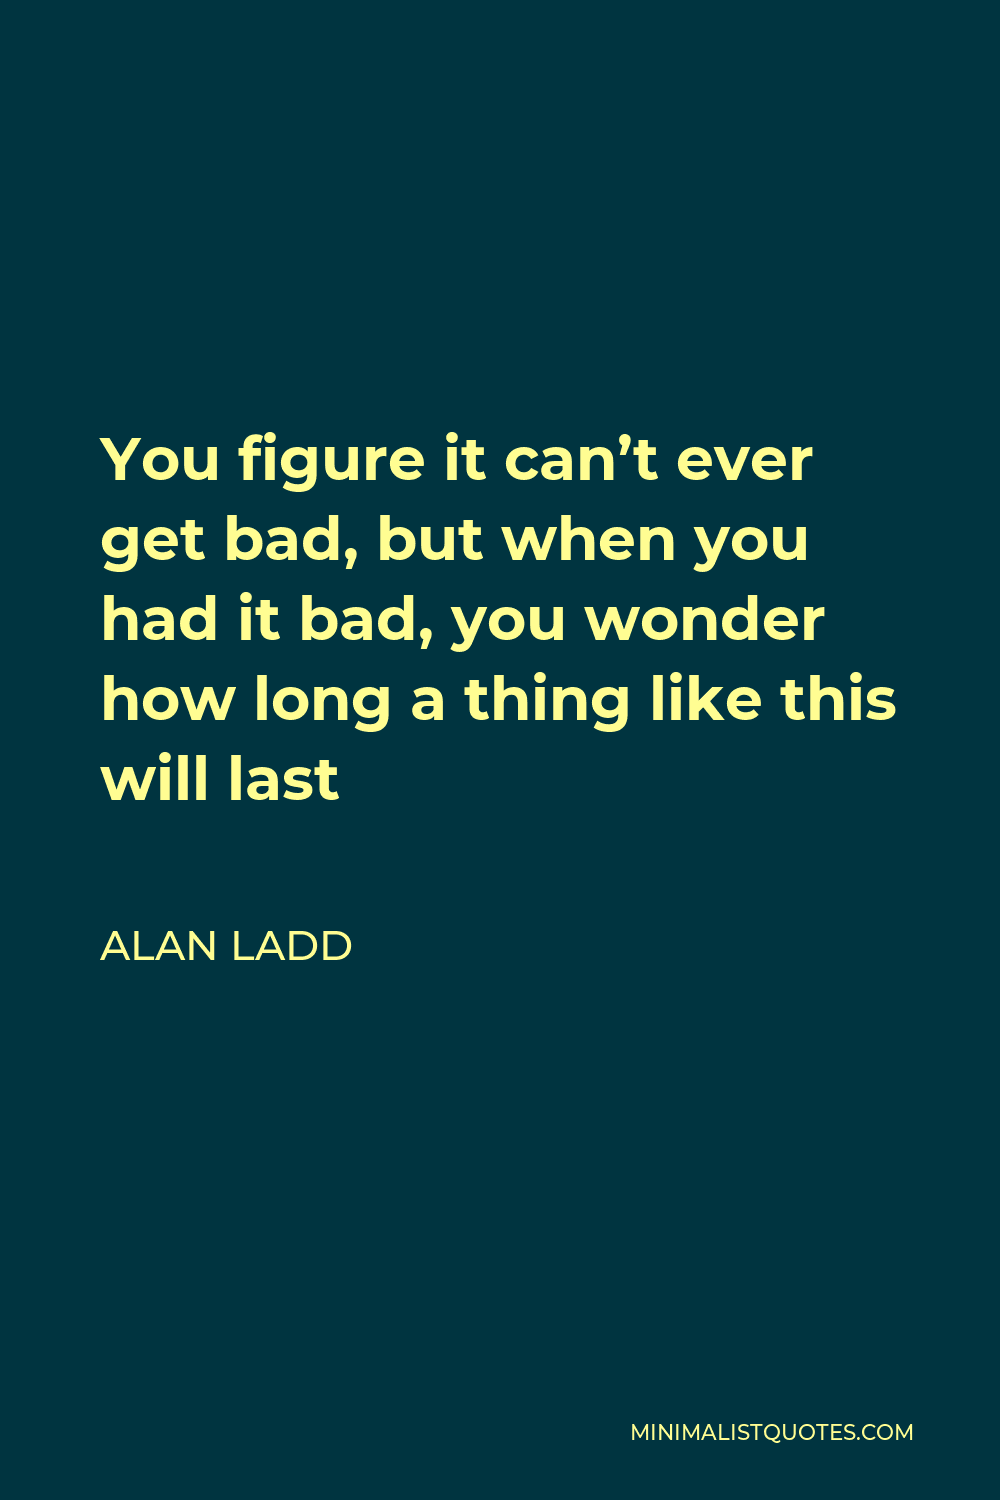 Alan Ladd Quote - You figure it can’t ever get bad, but when you had it bad, you wonder how long a thing like this will last